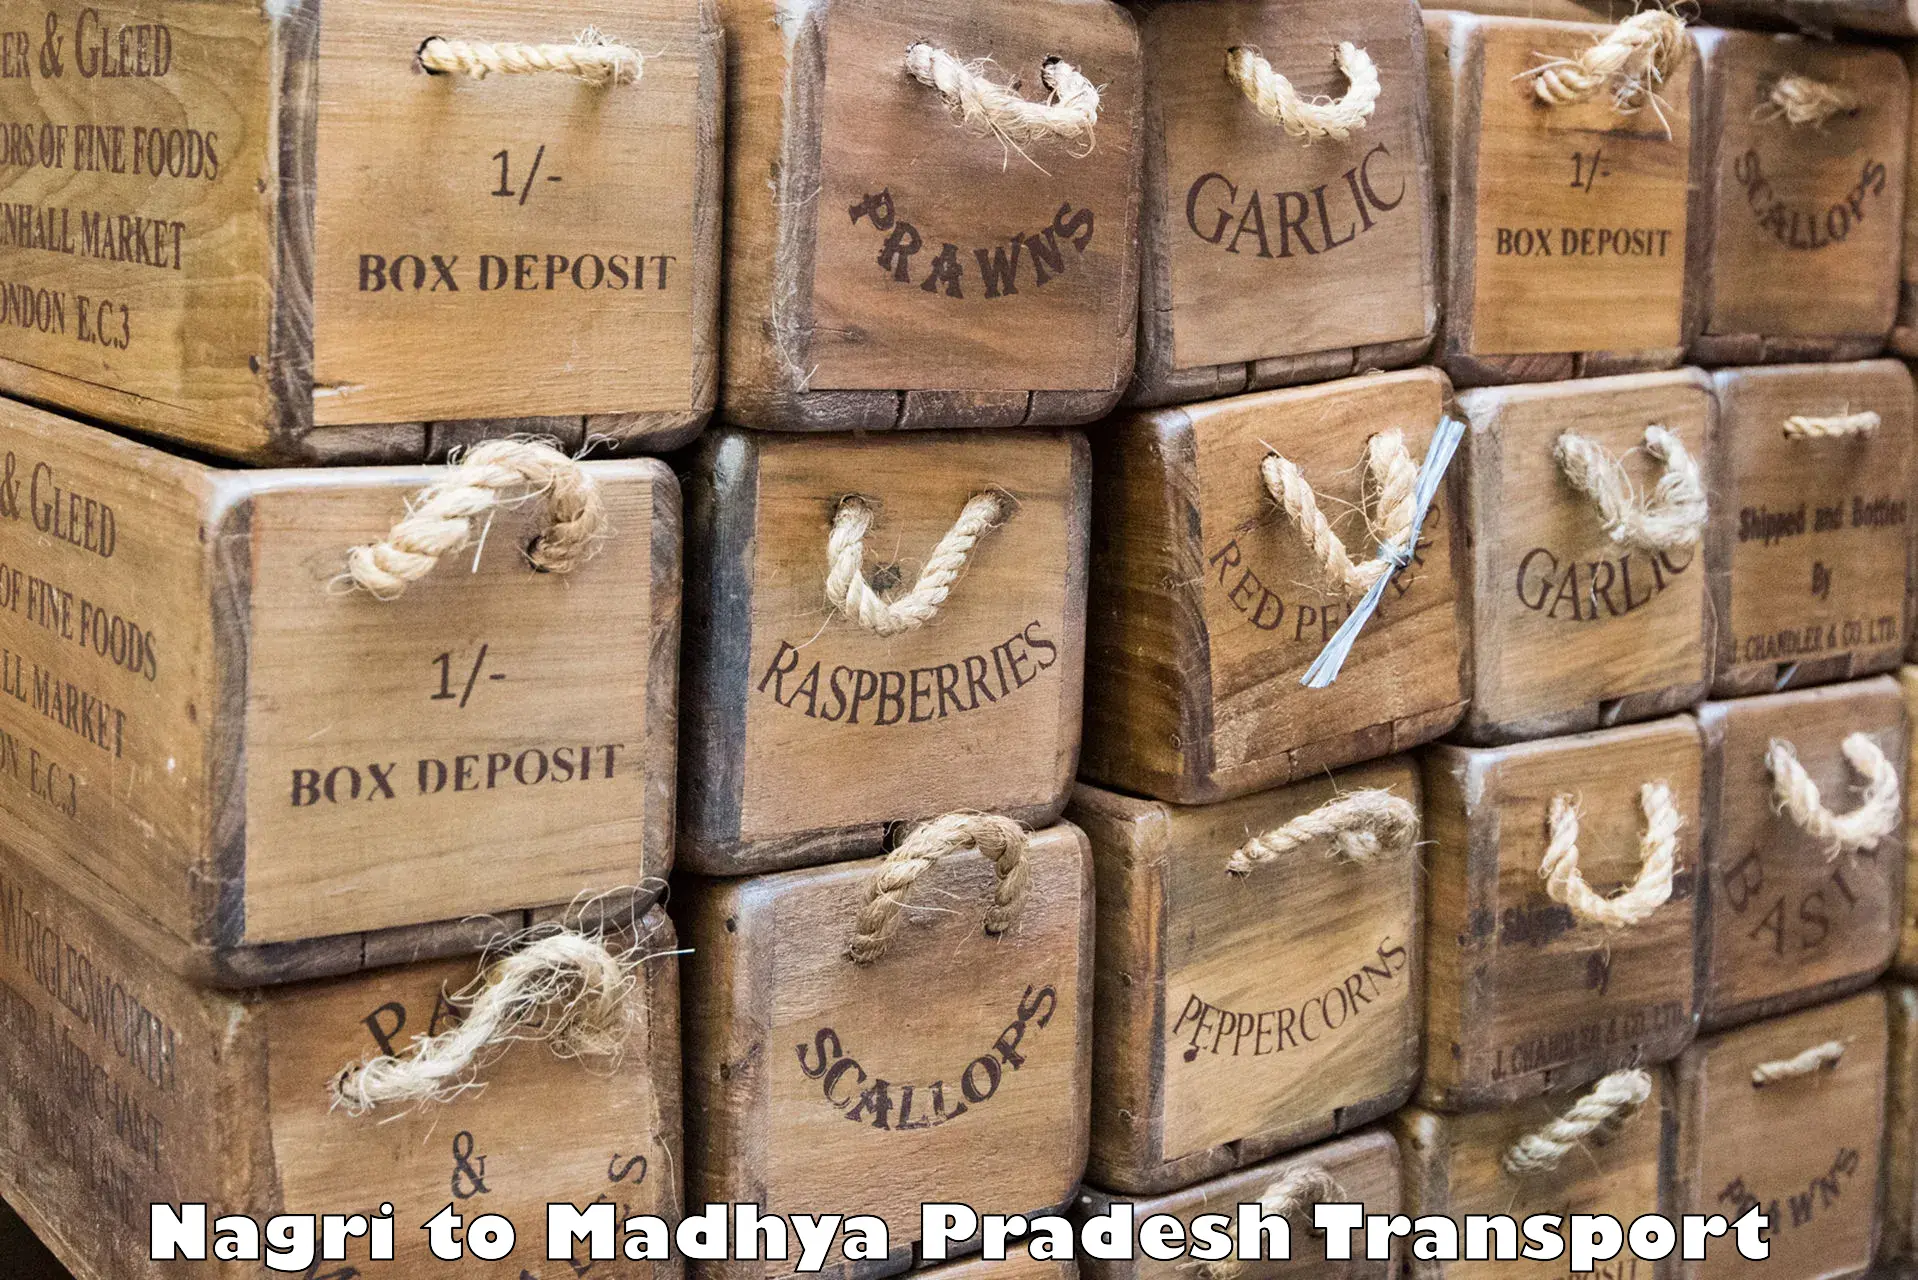 Truck transport companies in India Nagri to Chanderi